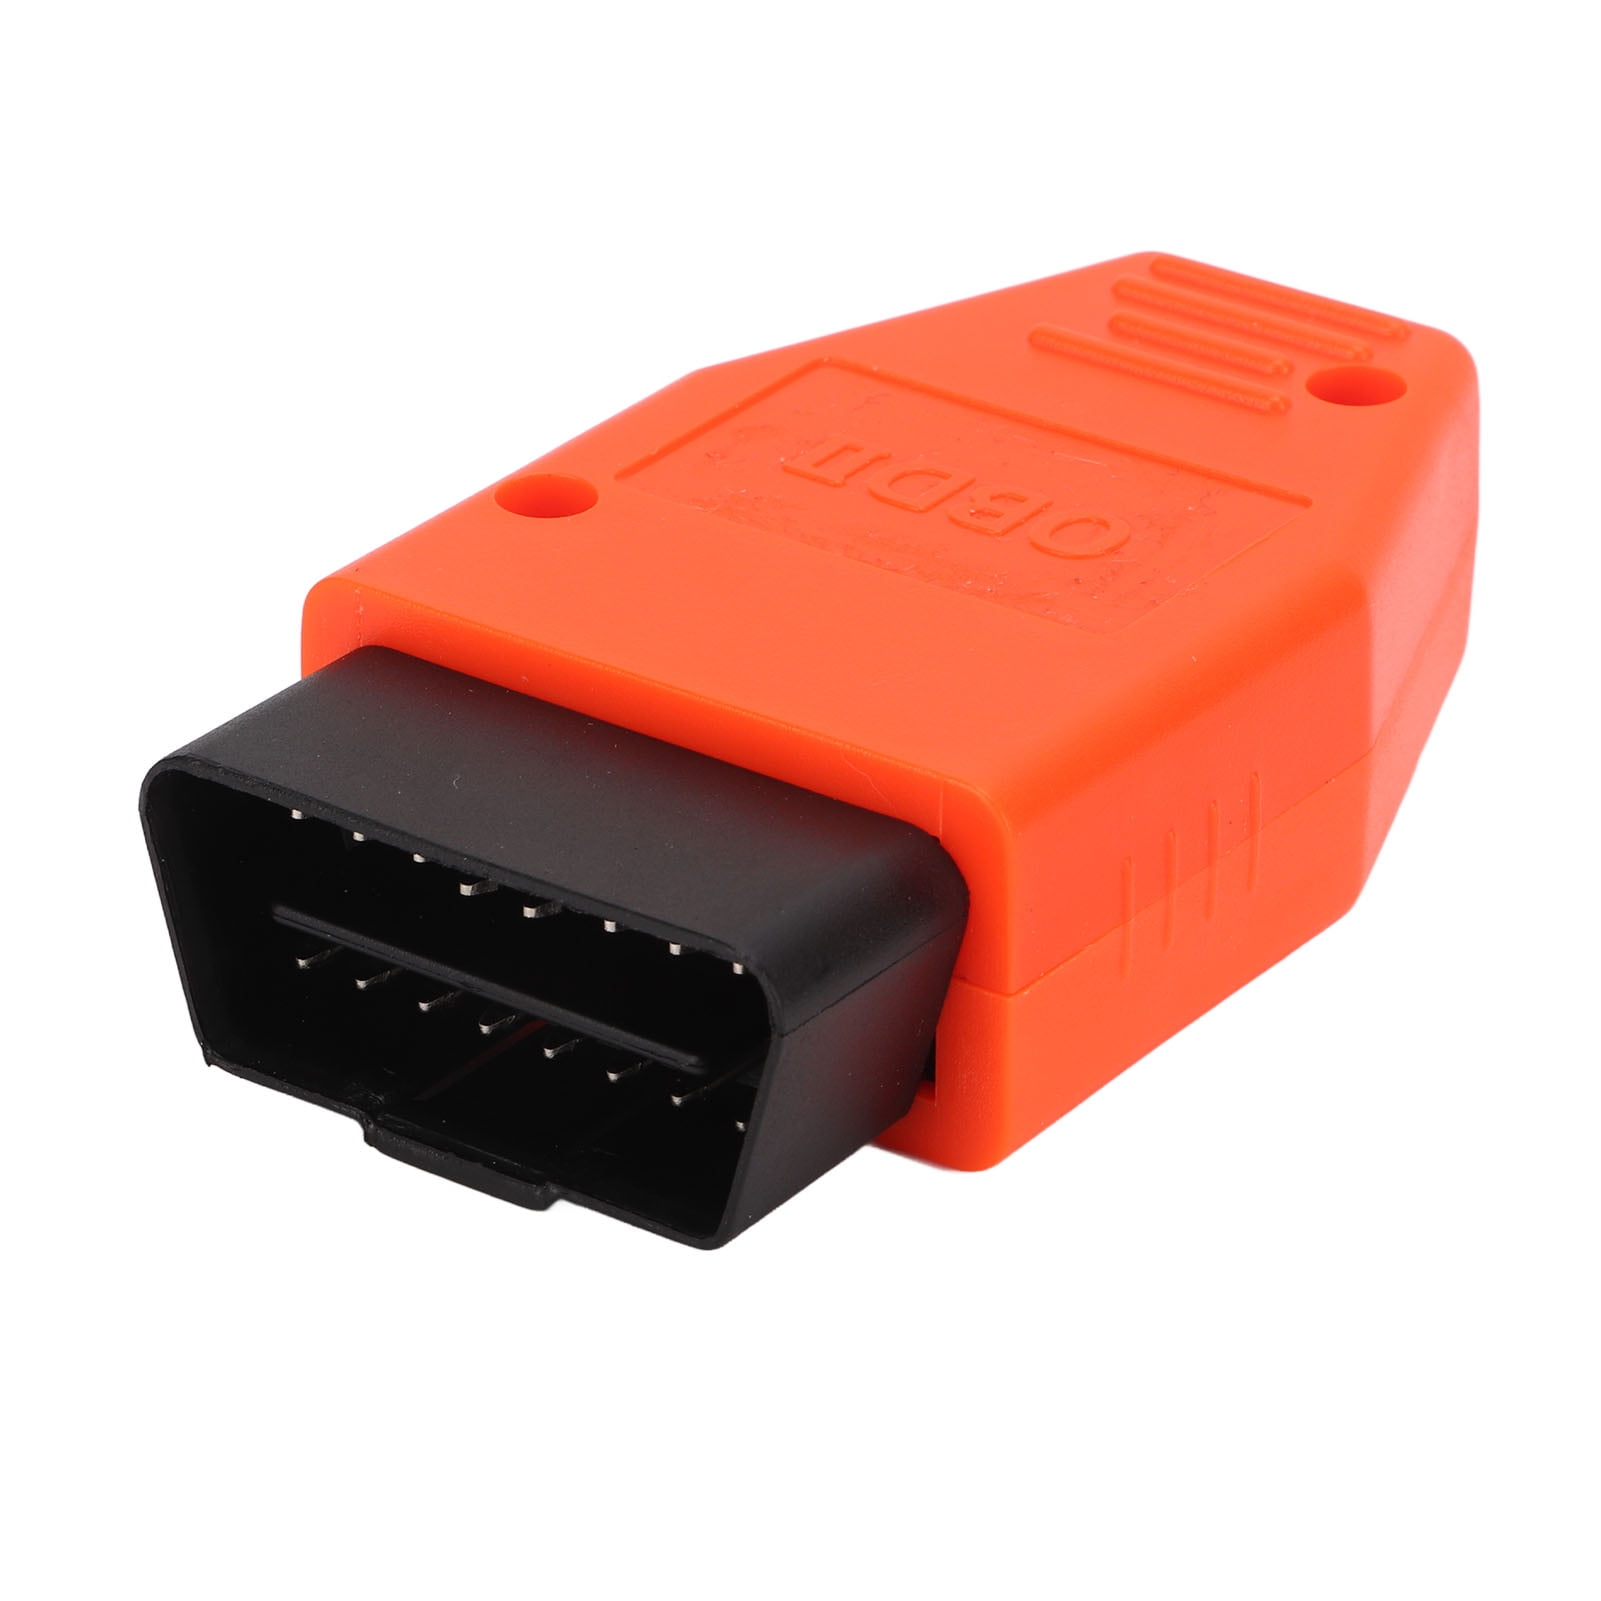  and 4C Chip for Key Programmer Vehicle OBD Remote for